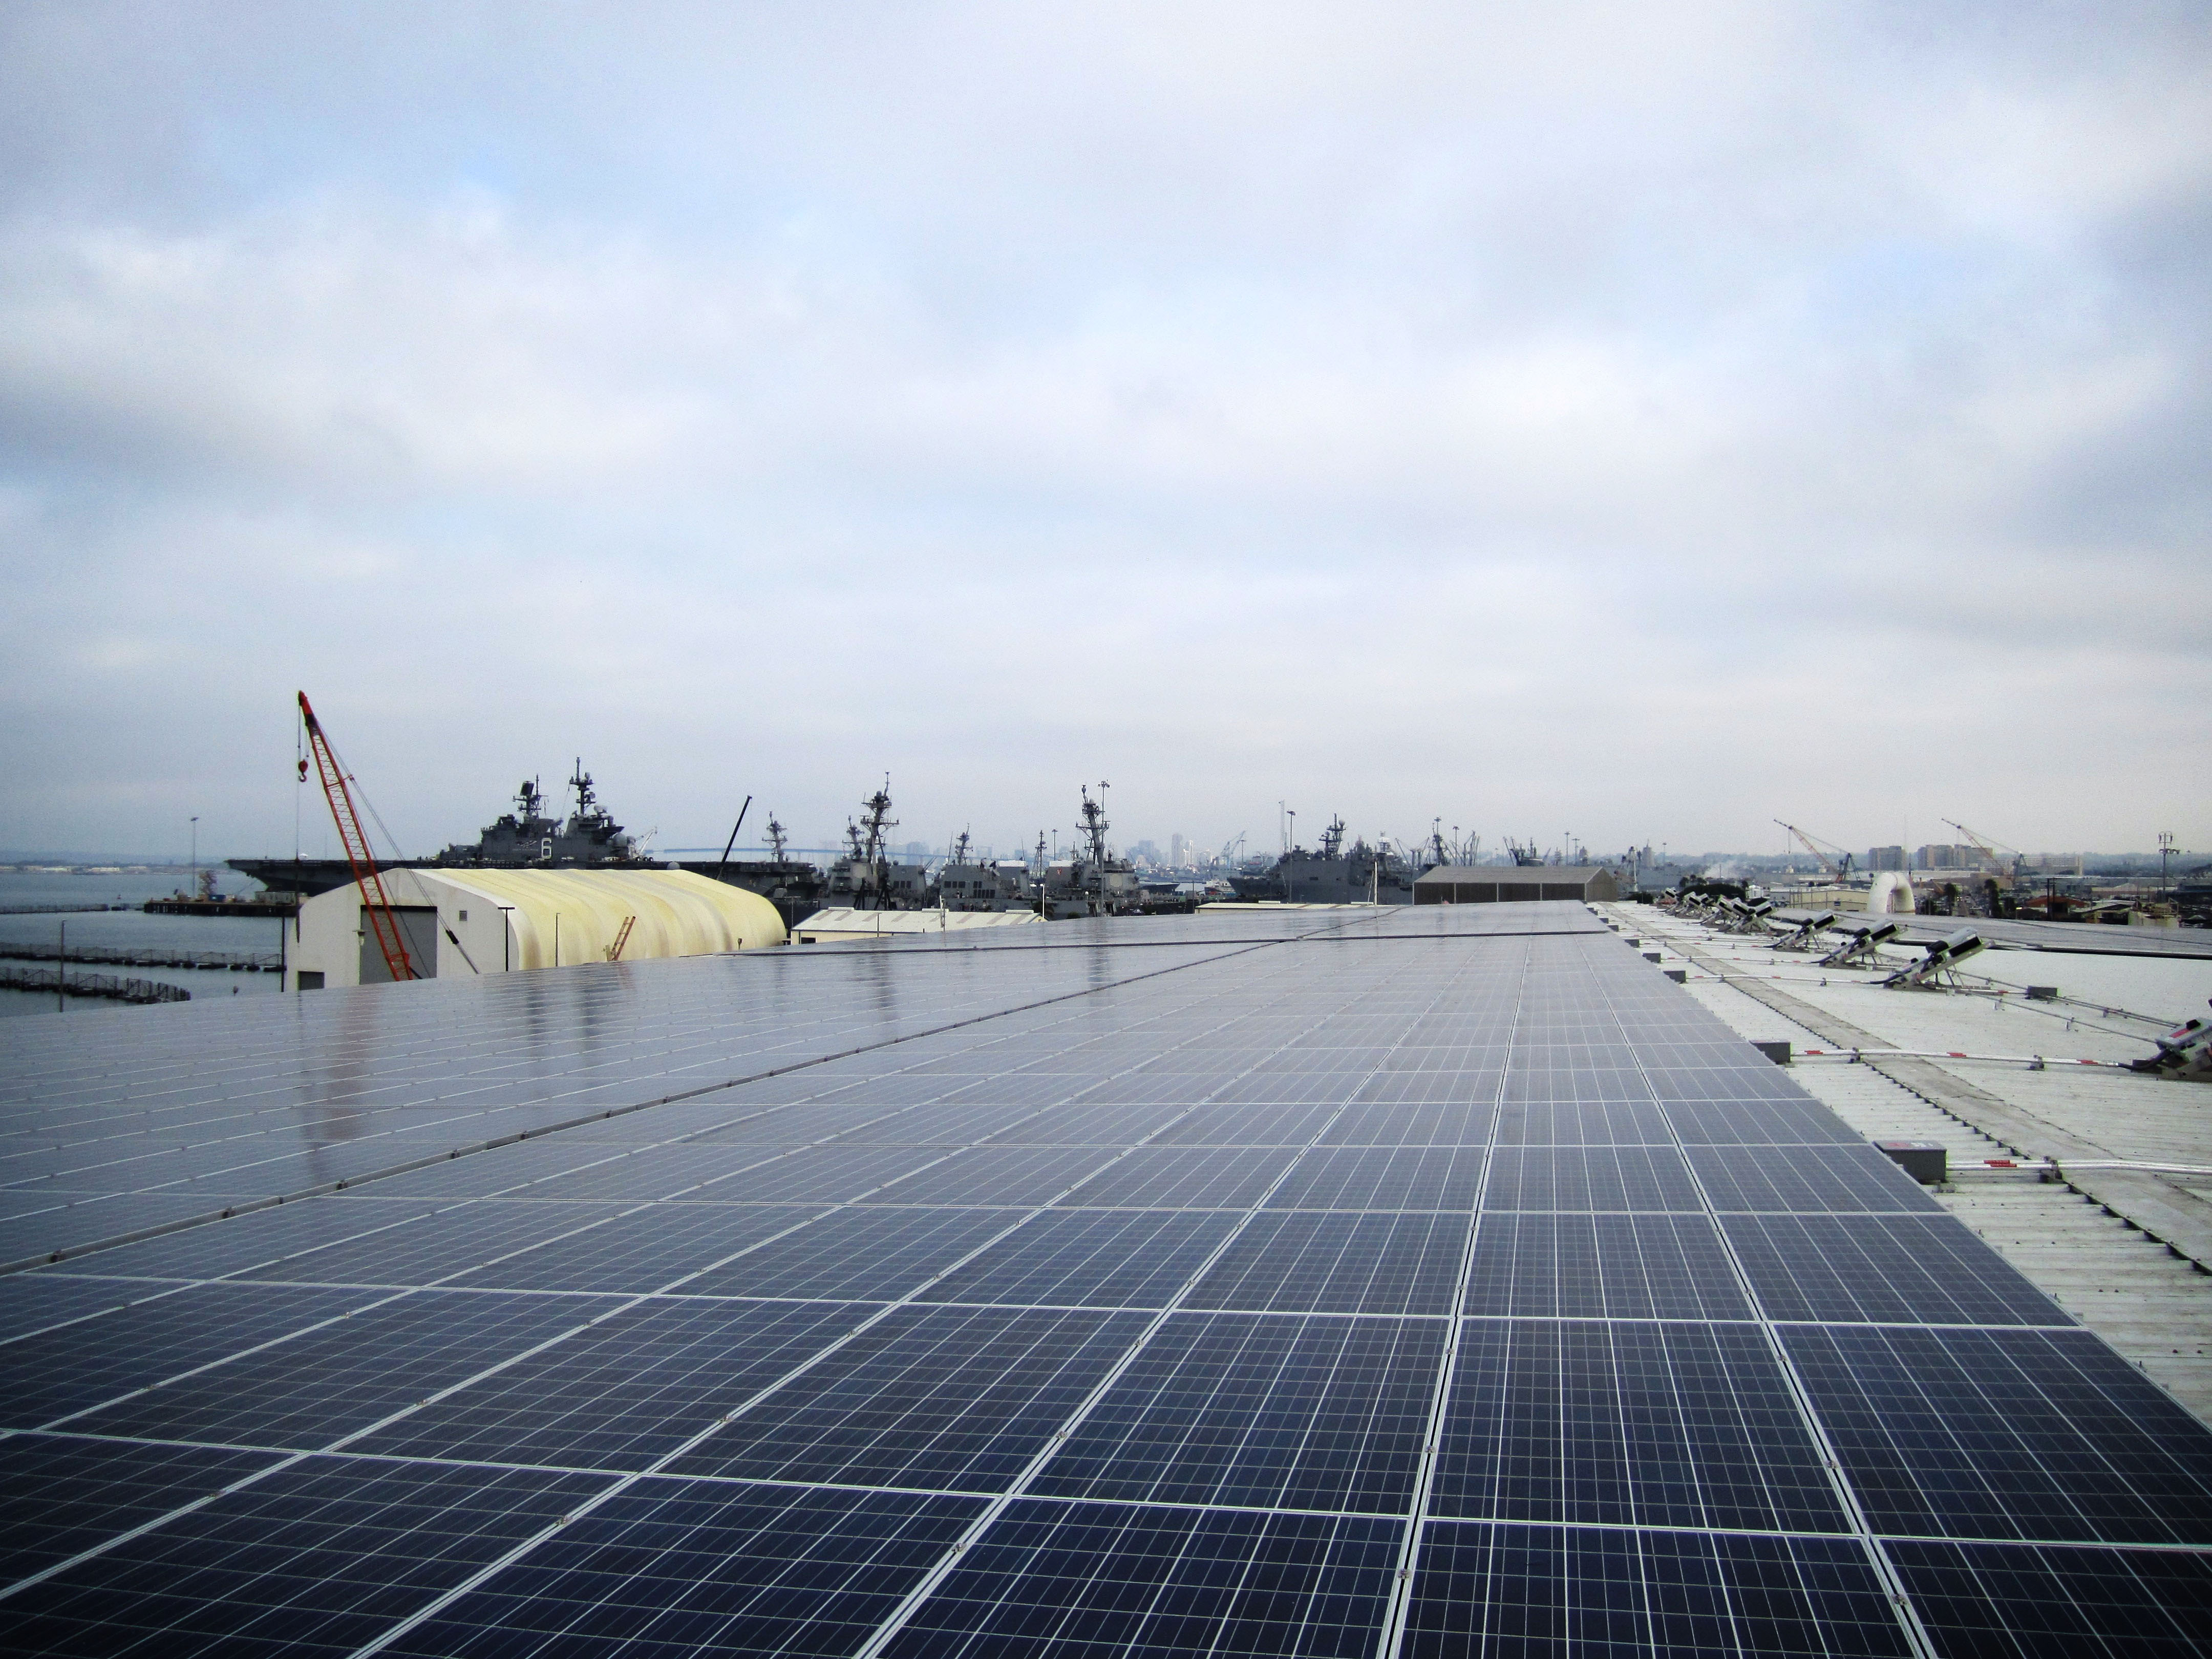 The solar system is comprised of 1,558 Hyundai 310 watt (W) solar modules with 14 SMA inverters.